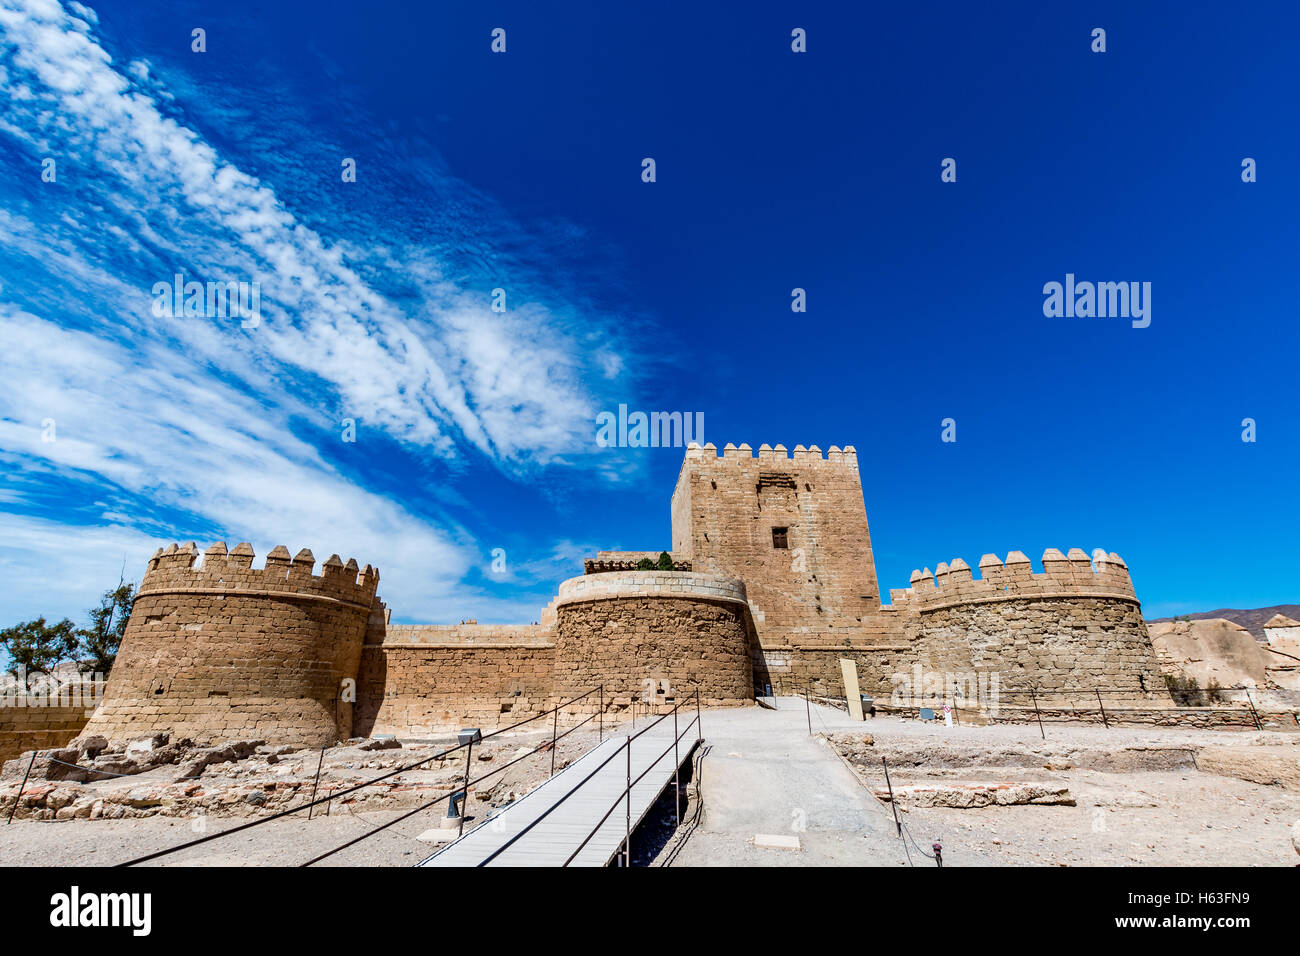 View of the Christian part of the Alcazaba in Almeria (Almeria Castle) on a beautiful day, horizontal, Spain Stock Photo